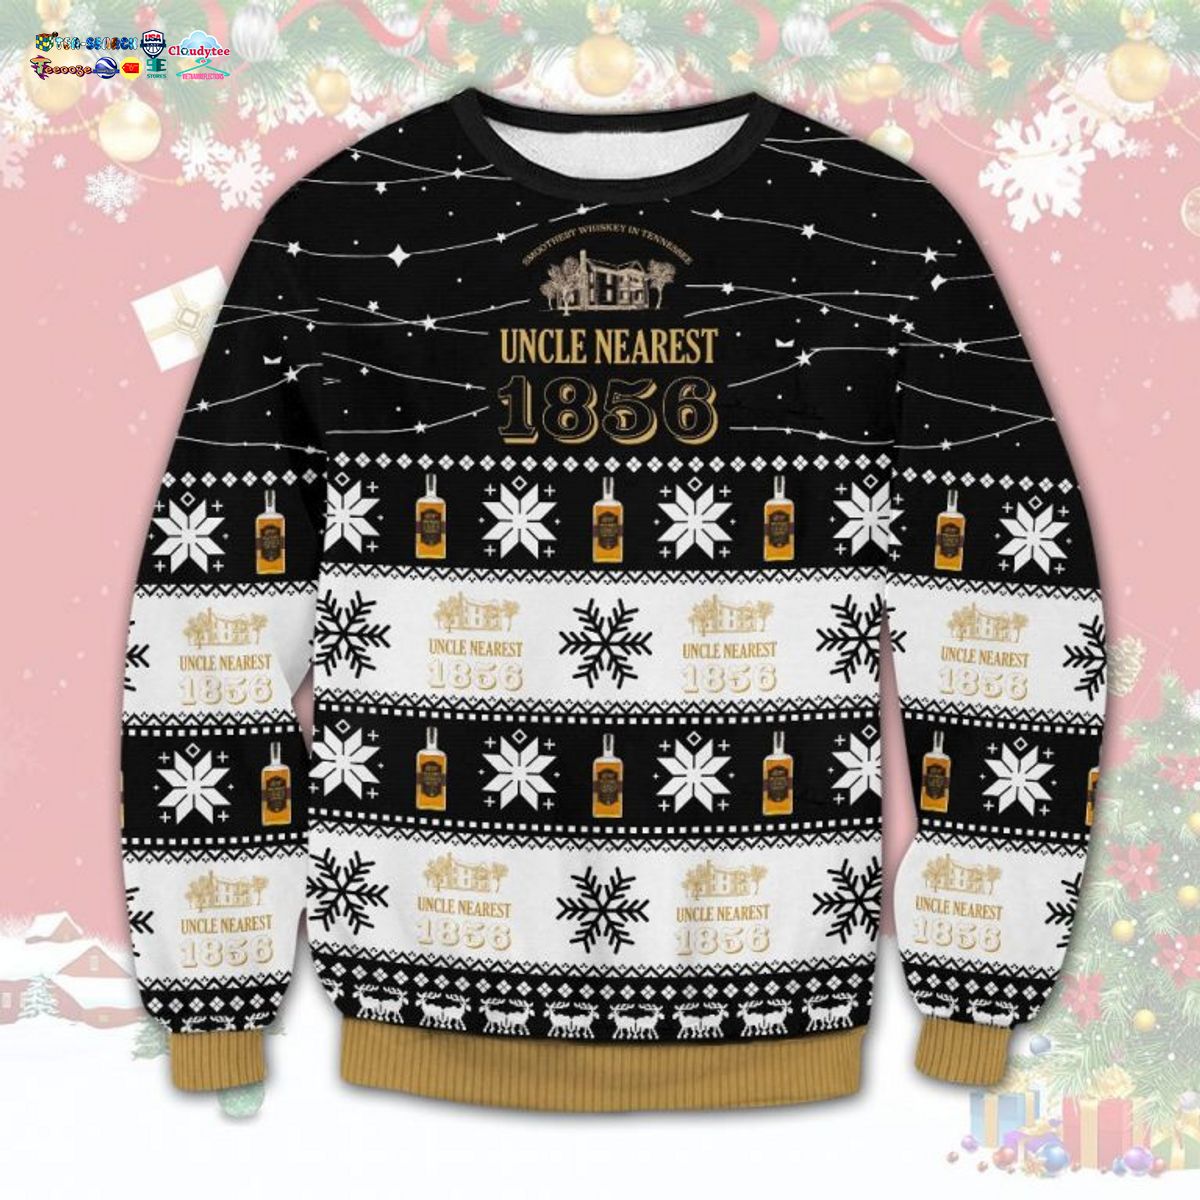 Uncle Nearest 1856 Ugly Christmas Sweater